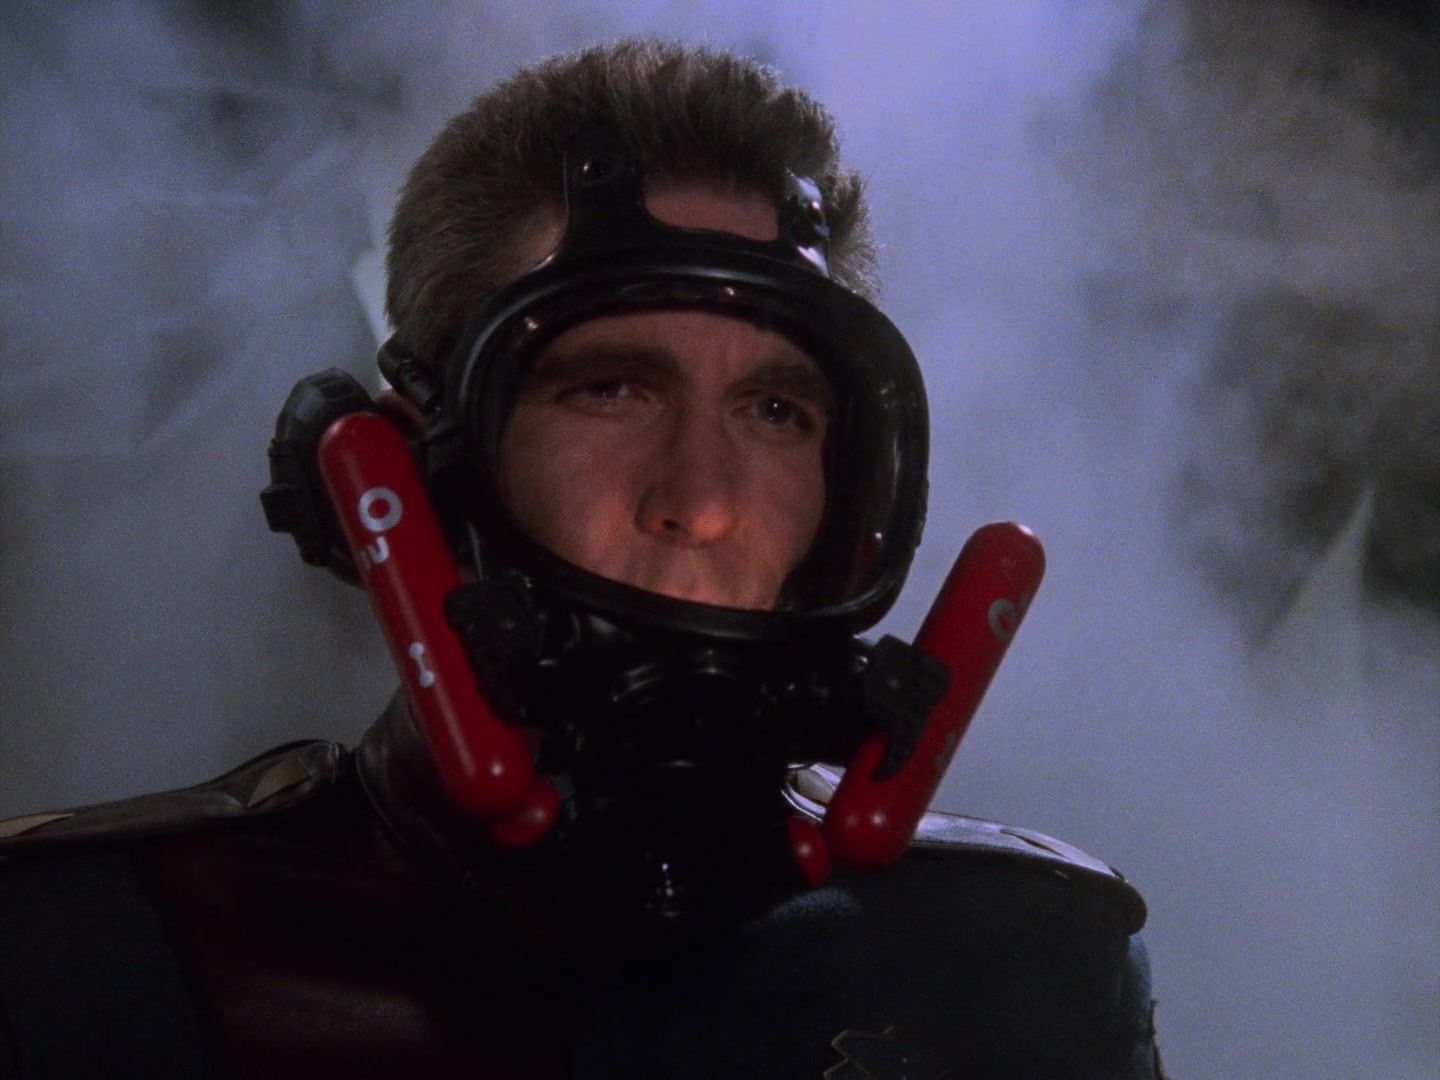 Commander Jeffrey Sinclair (Michael O’Hare) wearing a breathing apparatus.